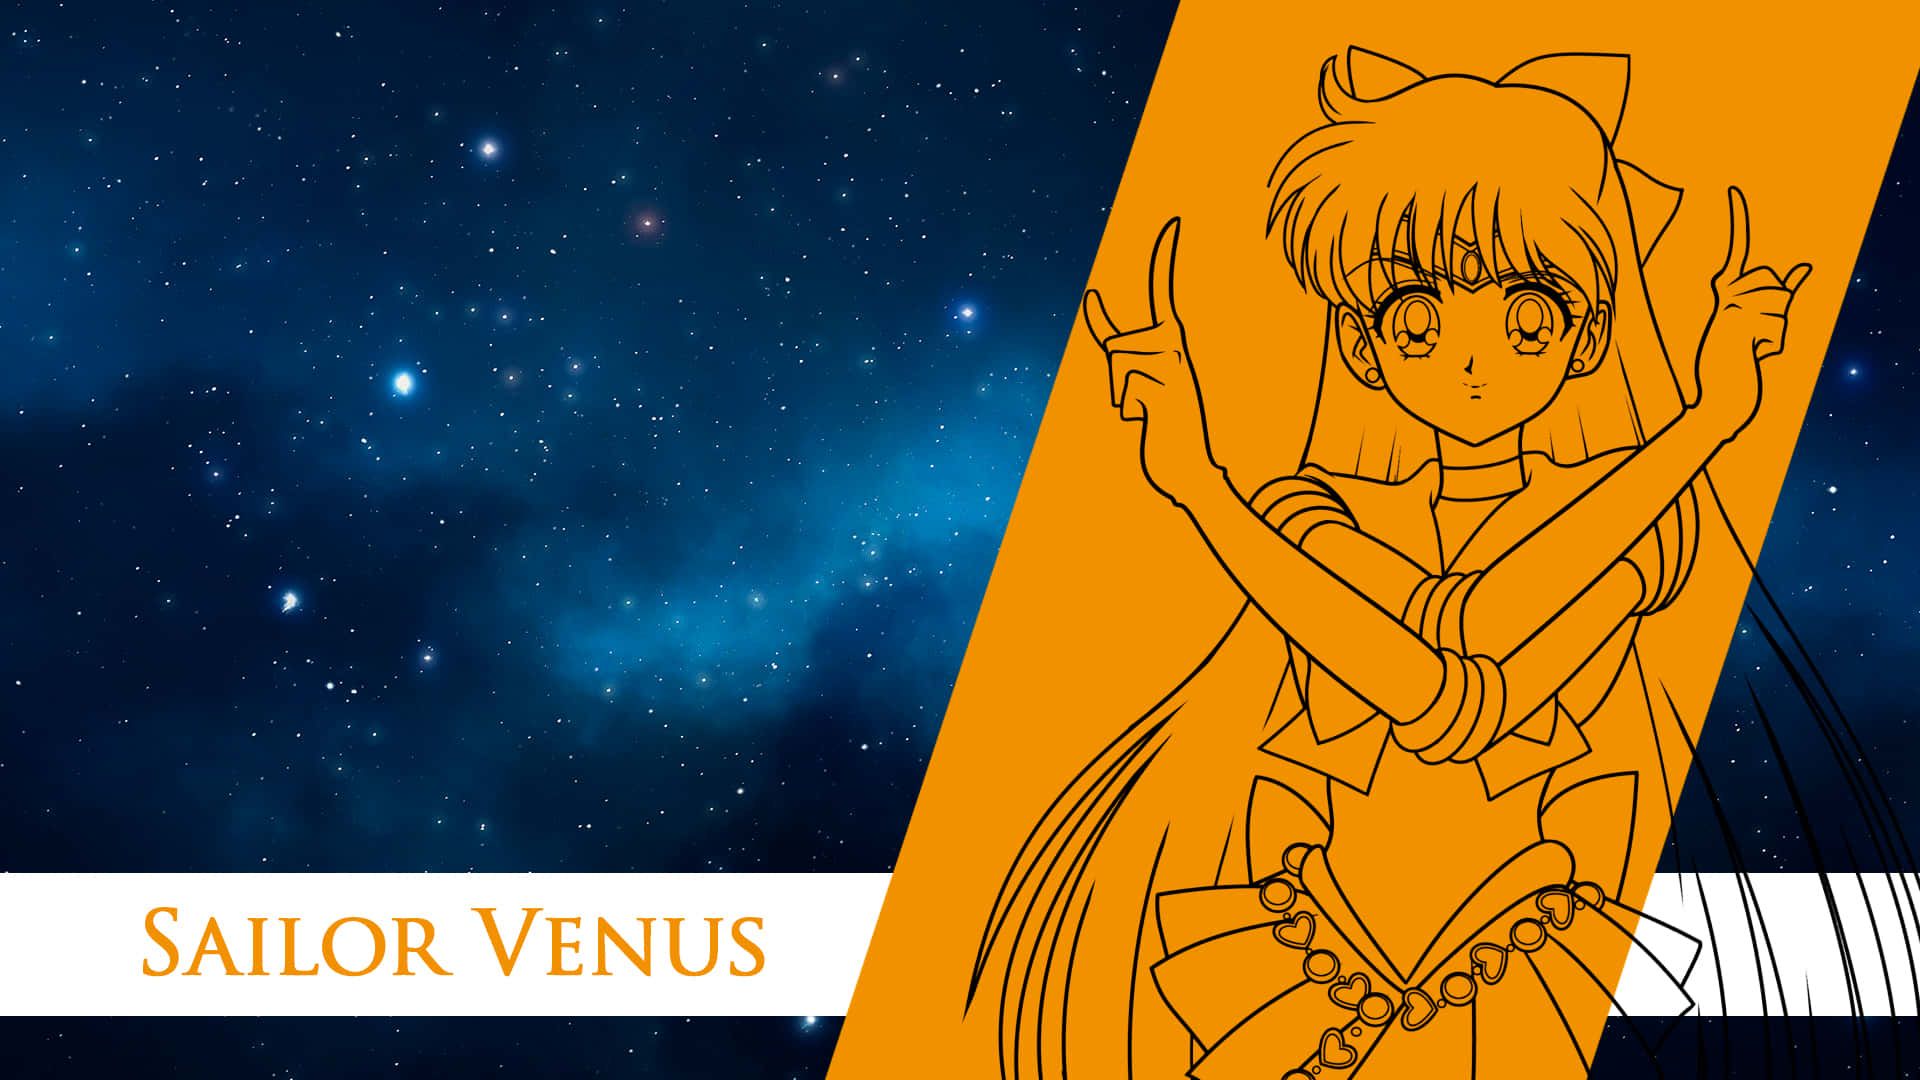 Sailor Venus, the first of the four inner Senshi, is a member of the sailor scouts and uses a sword as her weapon. - Sailor Venus